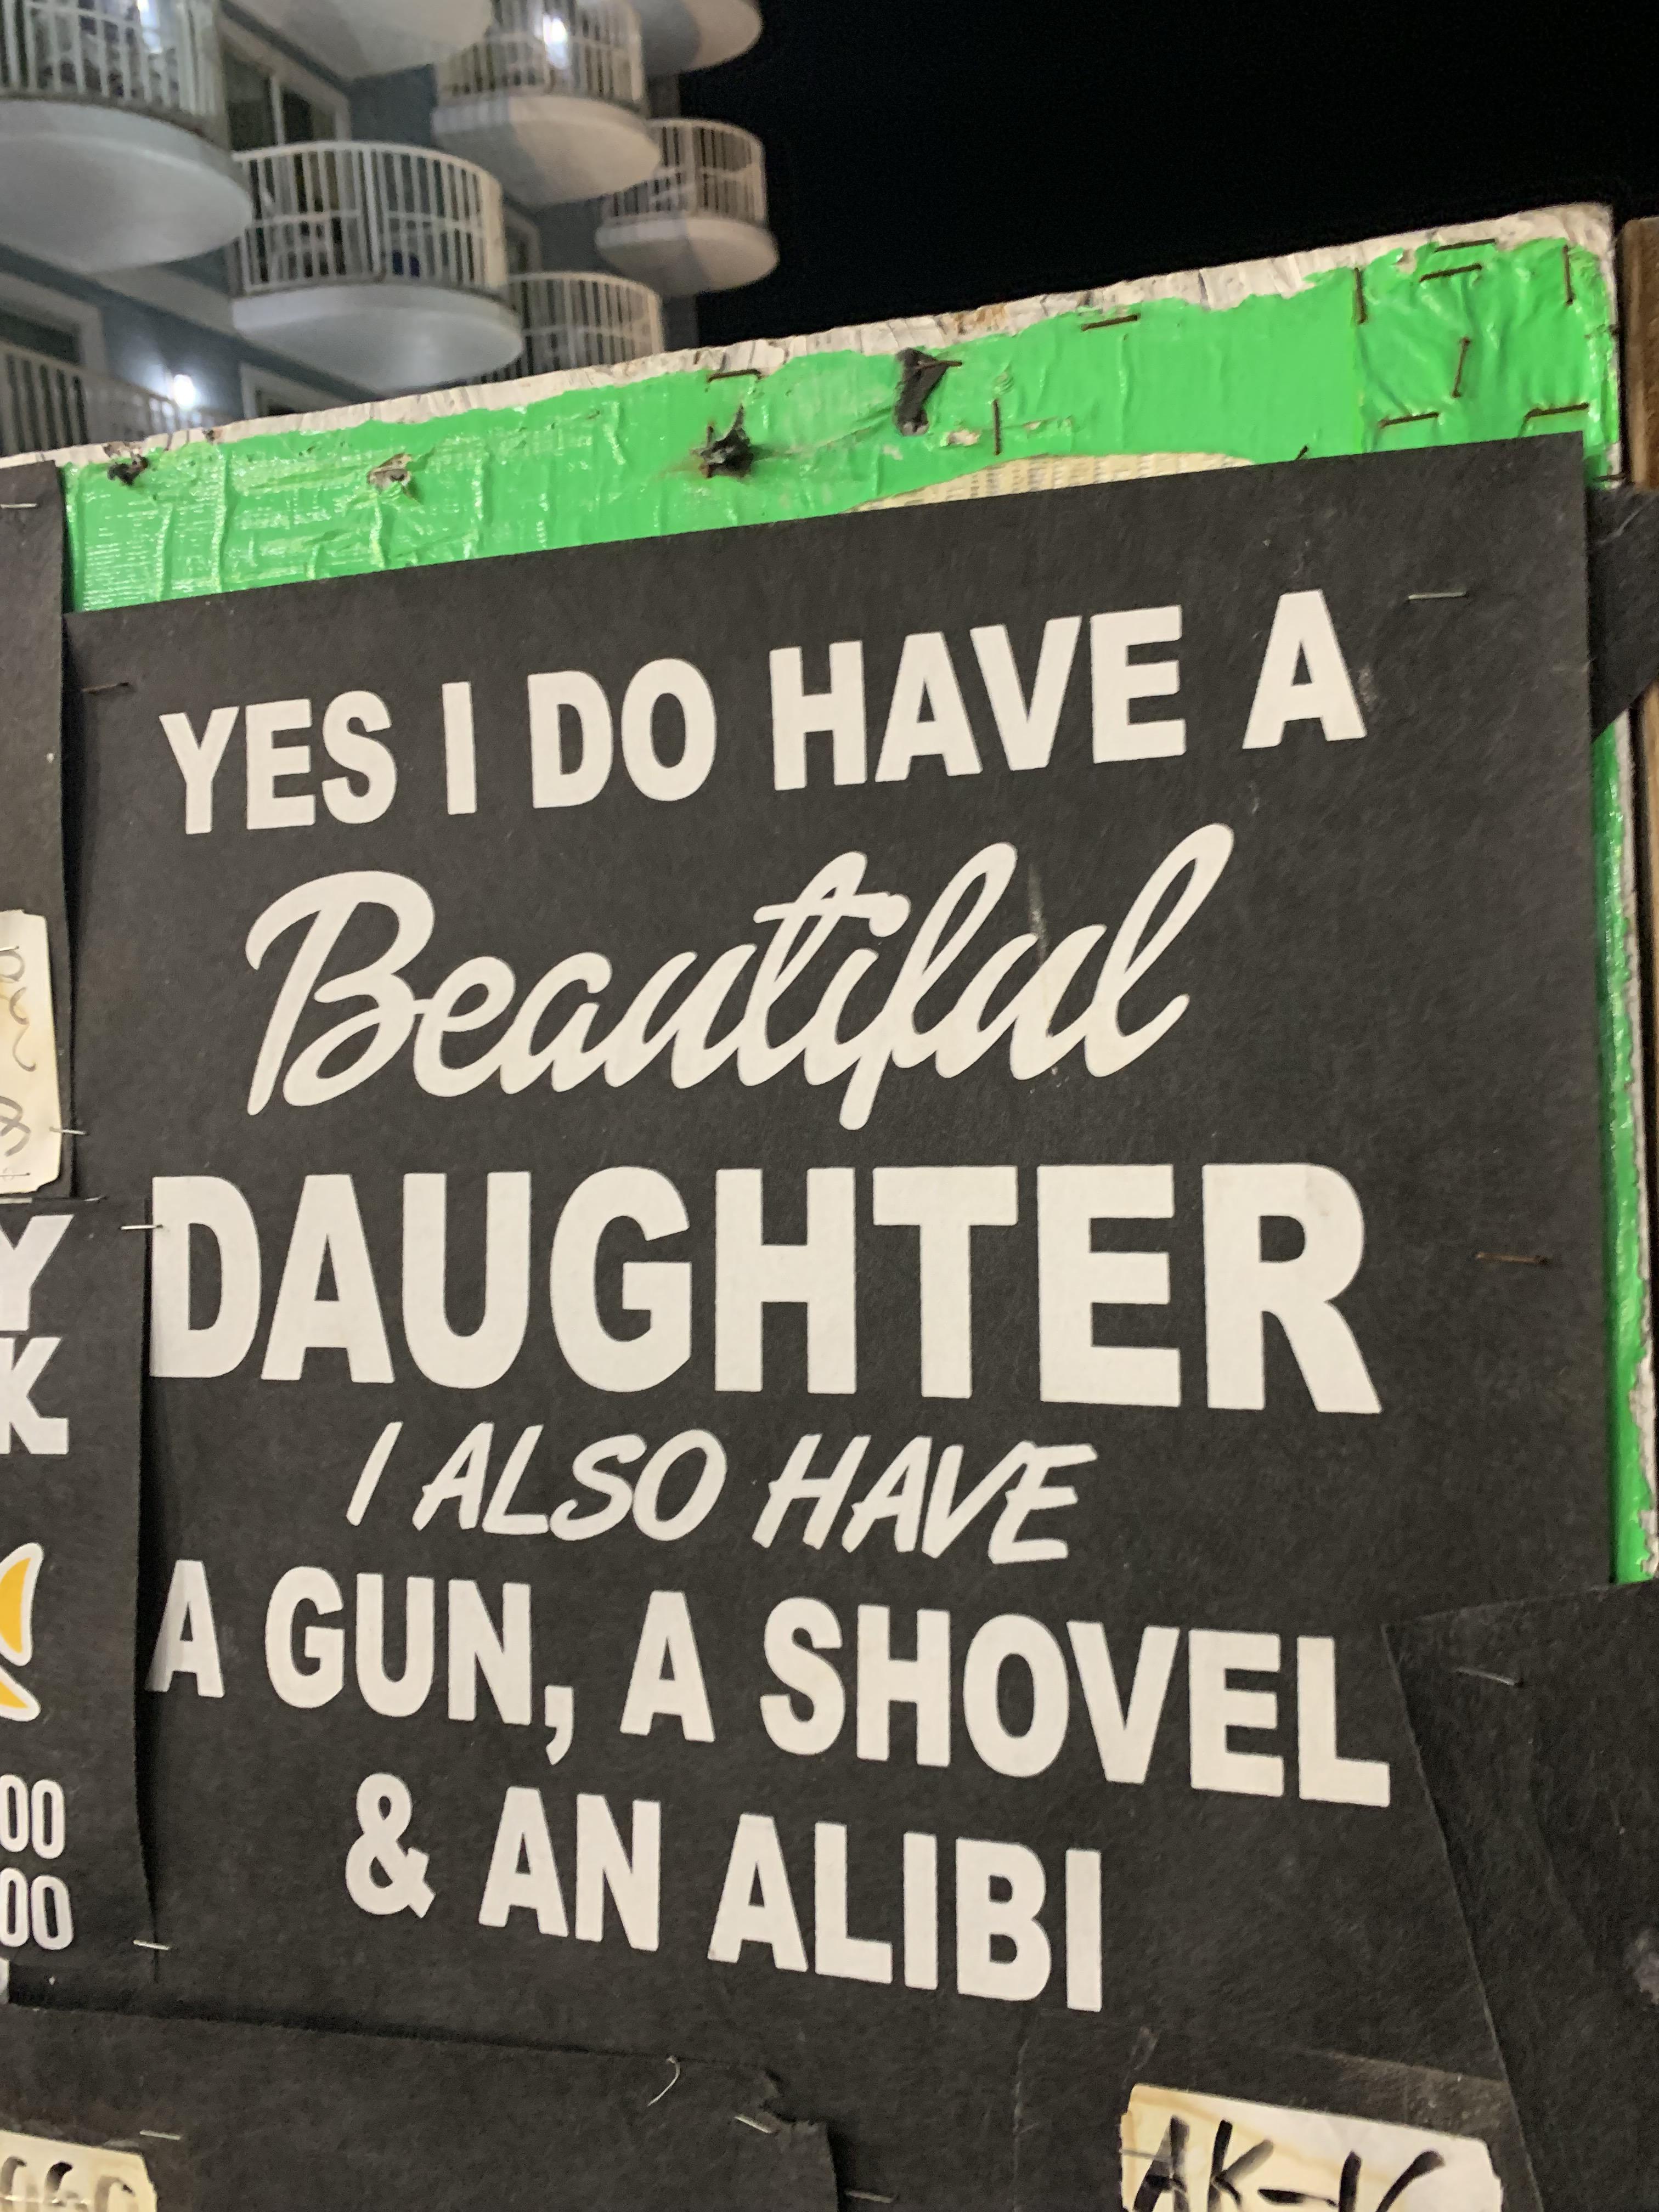 street sign - Md Yes I Do Have A Beautilul Daughter Also Have A Gun, A Shovel & An Alibi Ak